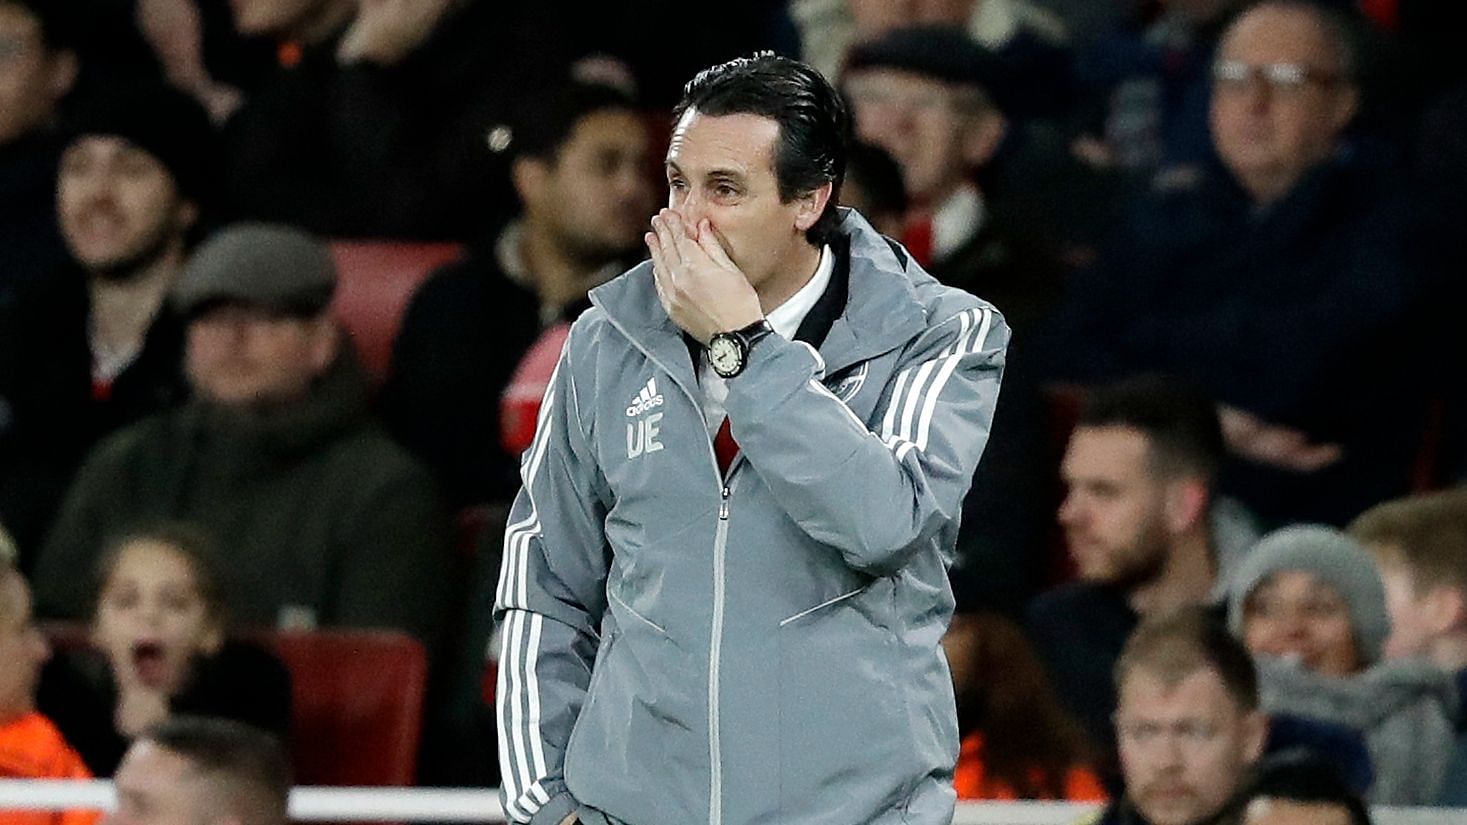 Arsenal manager Unai Emery has been fired after 18 months with the Premier League club.